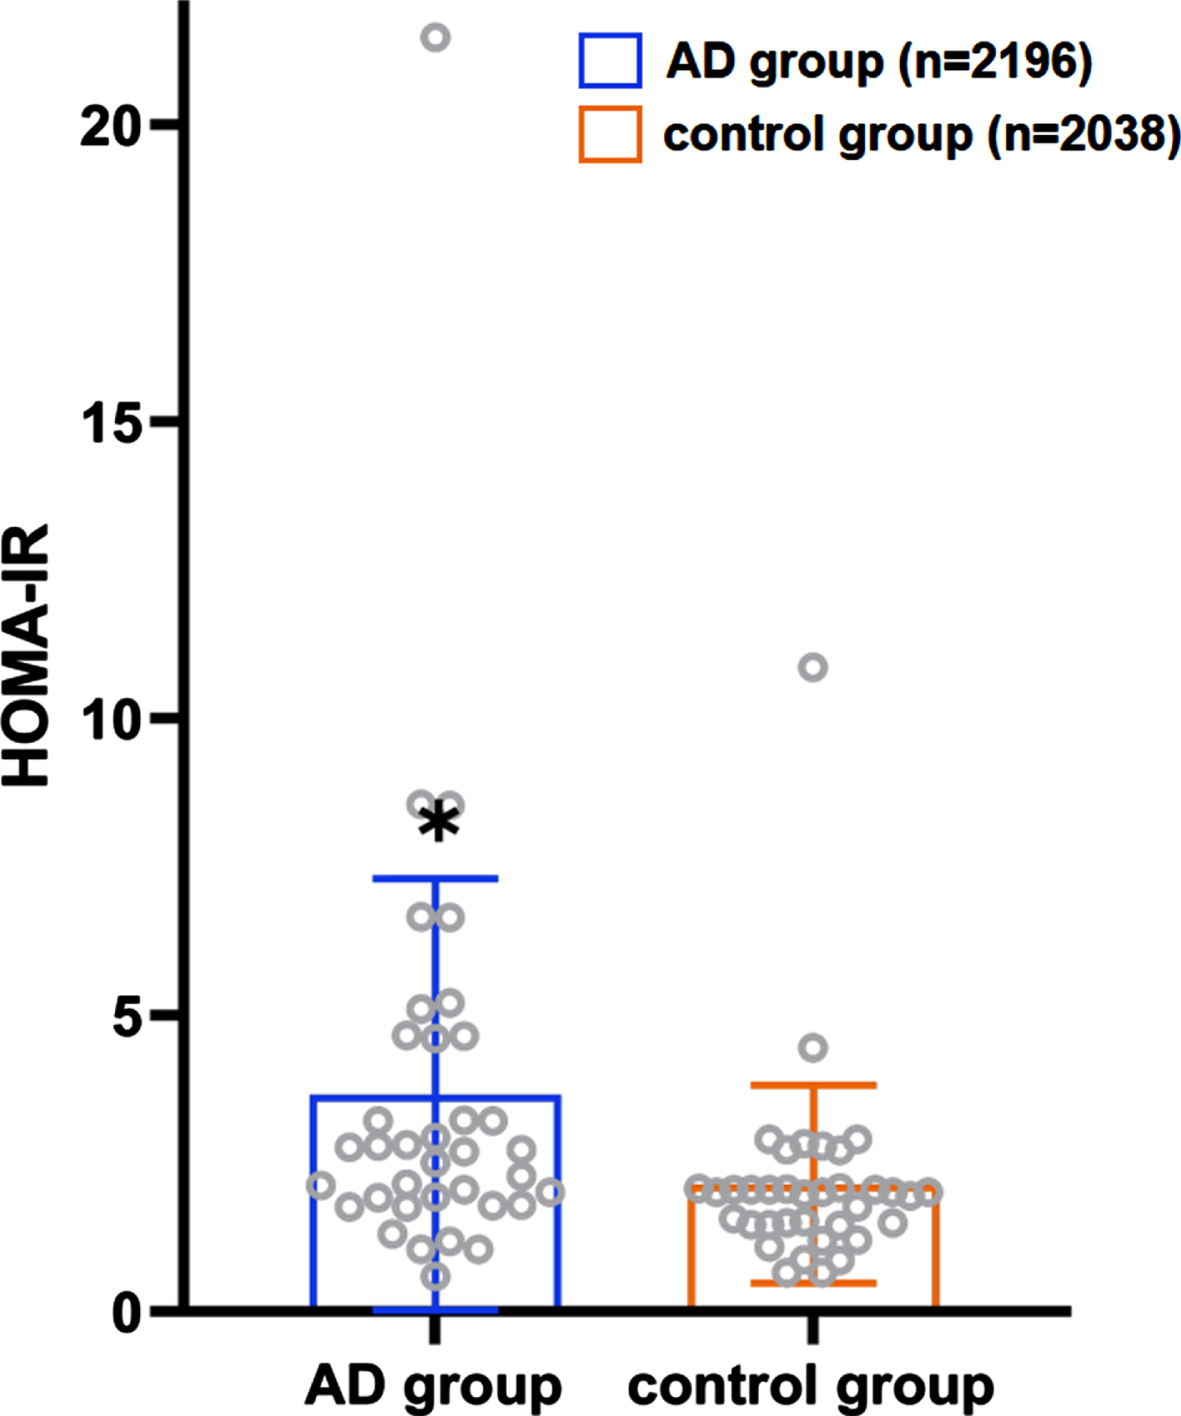 Distribution of the average HOMA-IR in the AD patient group and the control group.